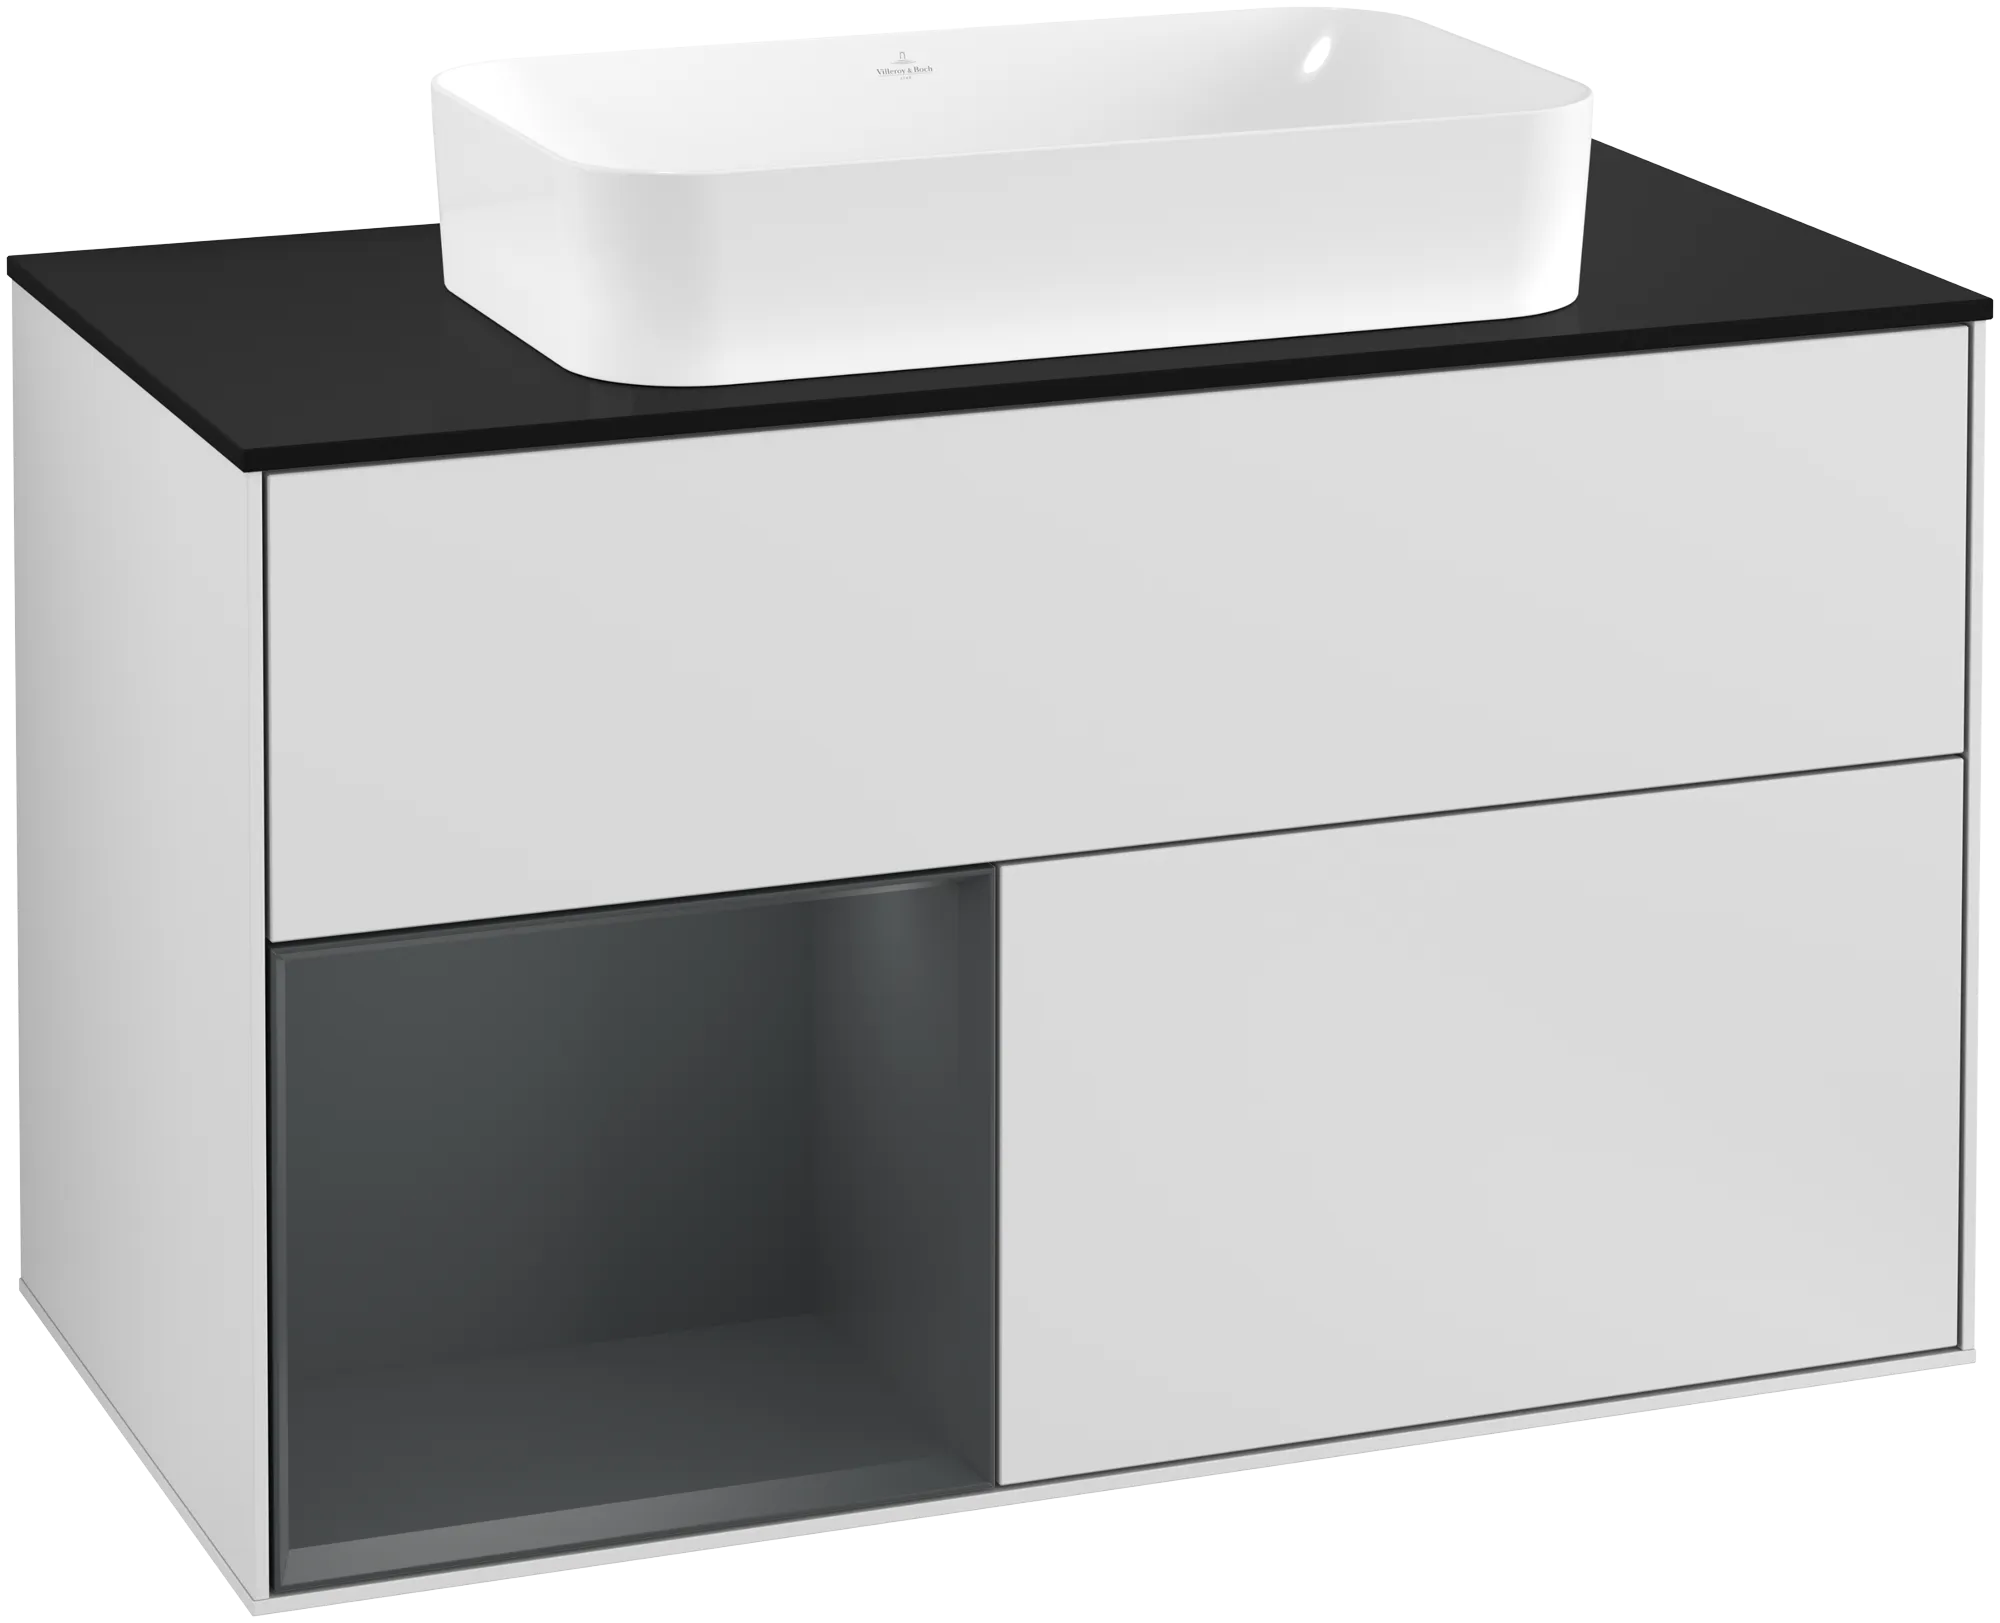 Picture of VILLEROY BOCH Finion Vanity unit, with lighting, 2 pull-out compartments, 1000 x 603 x 501 mm, White Matt Lacquer / Midnight Blue Matt Lacquer / Glass Black Matt #G242HGMT